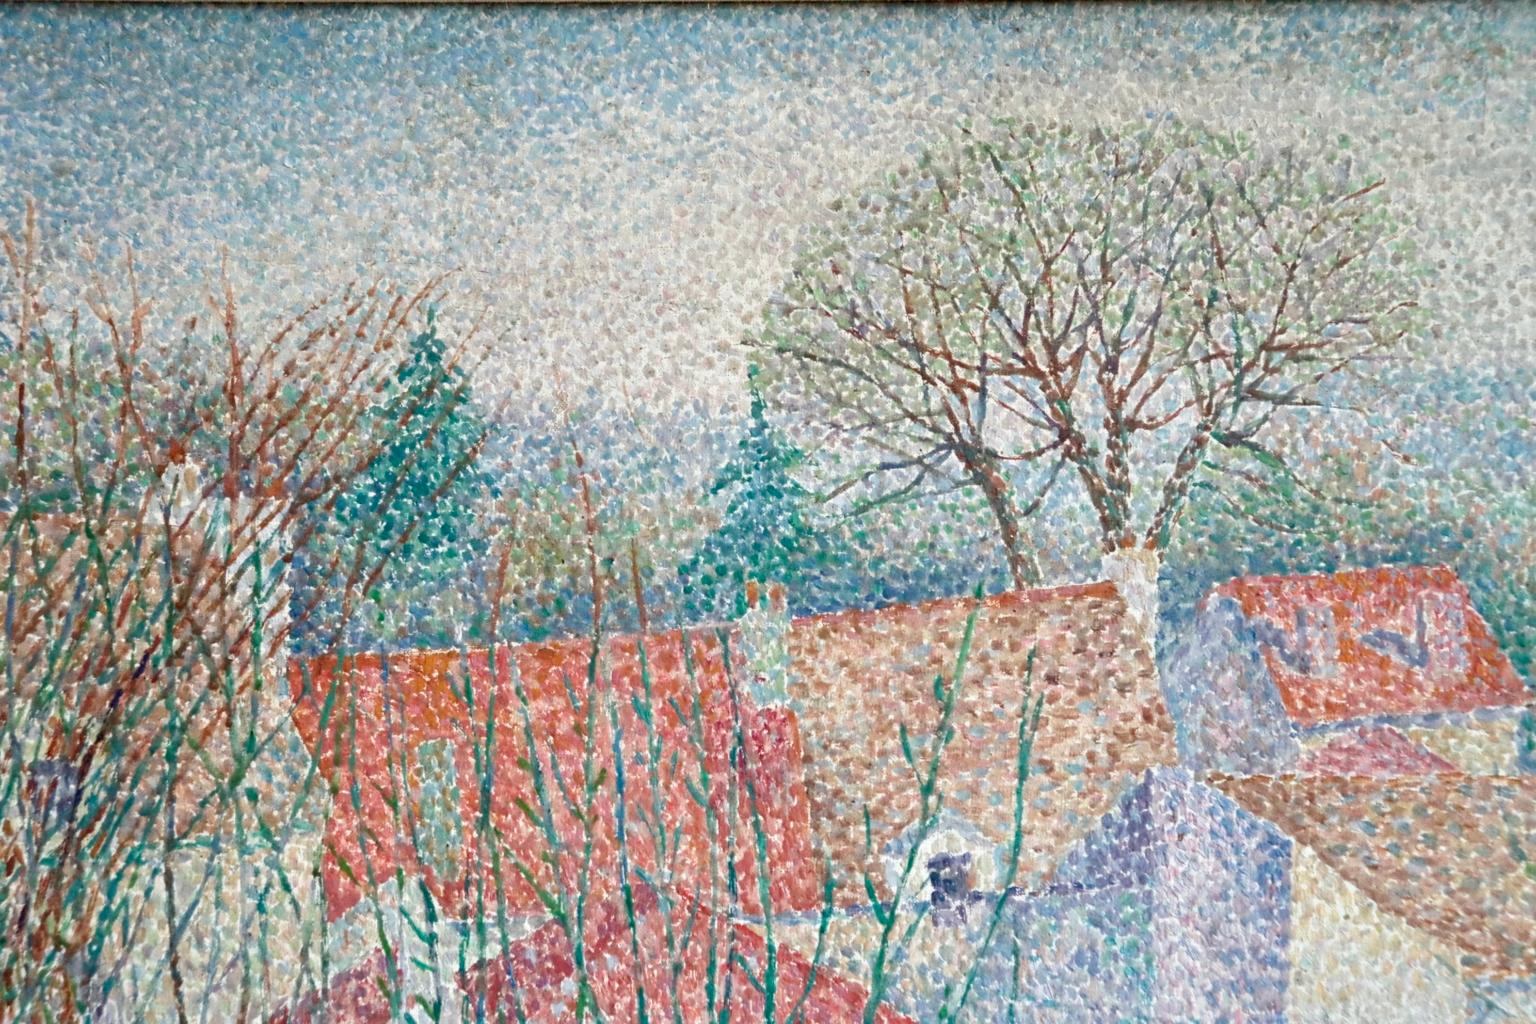 A wonderful pointillist oil on canvas by Russian painter Marie Vorobieff Marevna depicting a view of houses through trees. The artist lived at Athelhampton House from 1949 until 1957. Her work has been on public display there until the house's sale